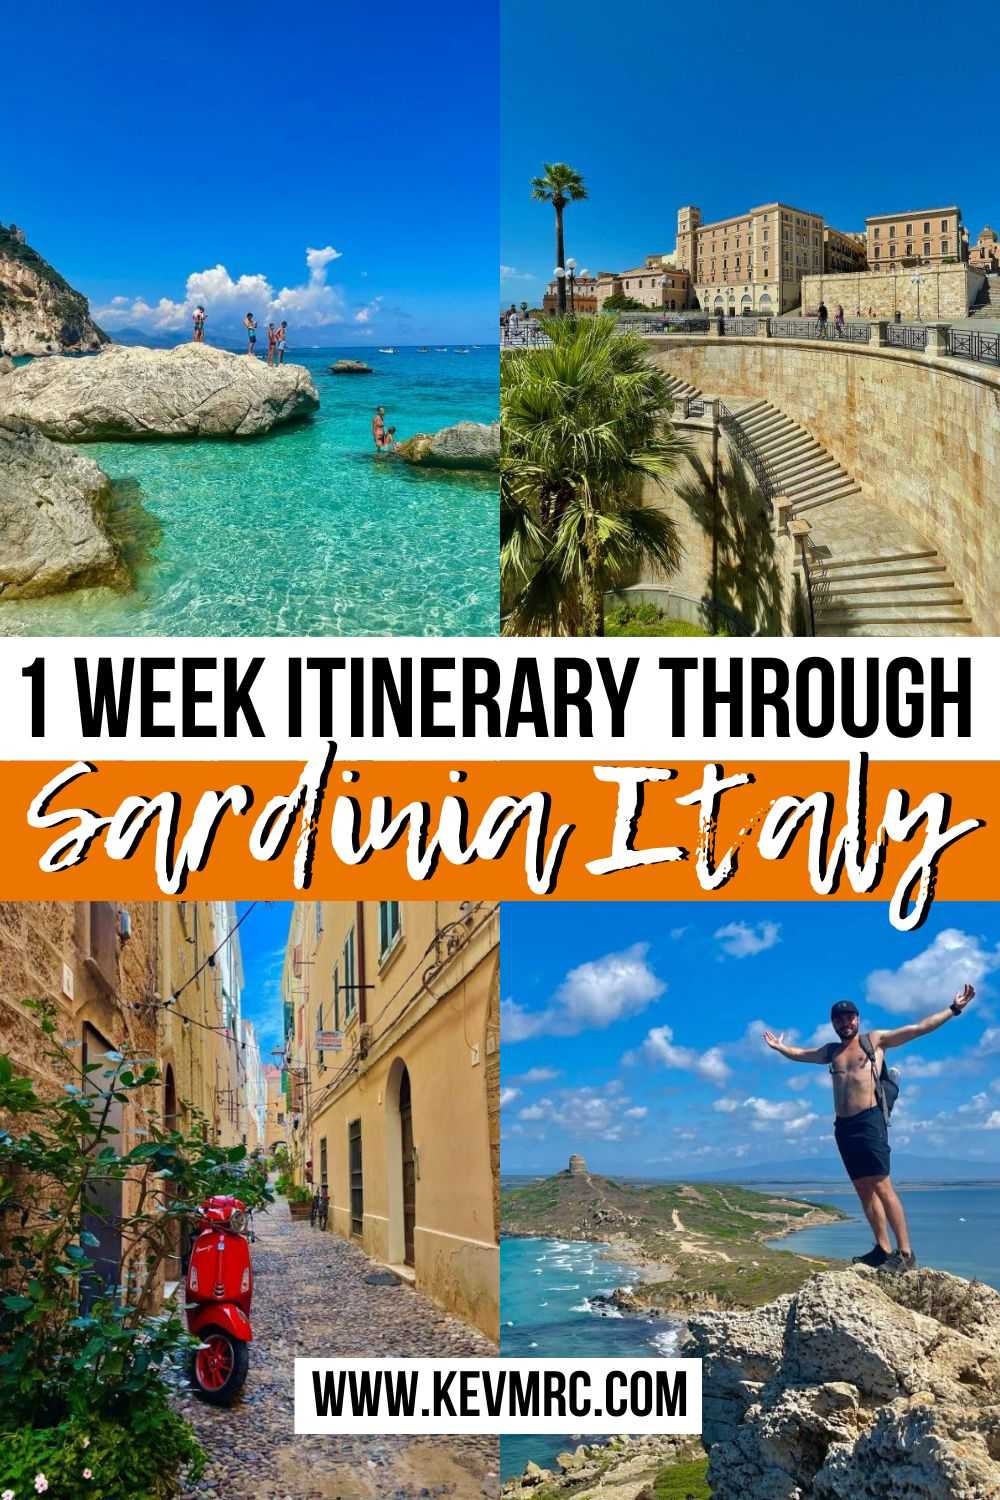 Looking to explore Sardinia in a week? To help you plan your trip, I'm sharing with you my tested and approved 1 week Sardinia itinerary, along with expert tips, and a free easy-to-follow map. sardinia italy itinerary | what to do in sardinia italy | sardinia travel guide | sardinia travel itinerary | travel to sardinia | trip to sardinia | visit sardinia #sardinia